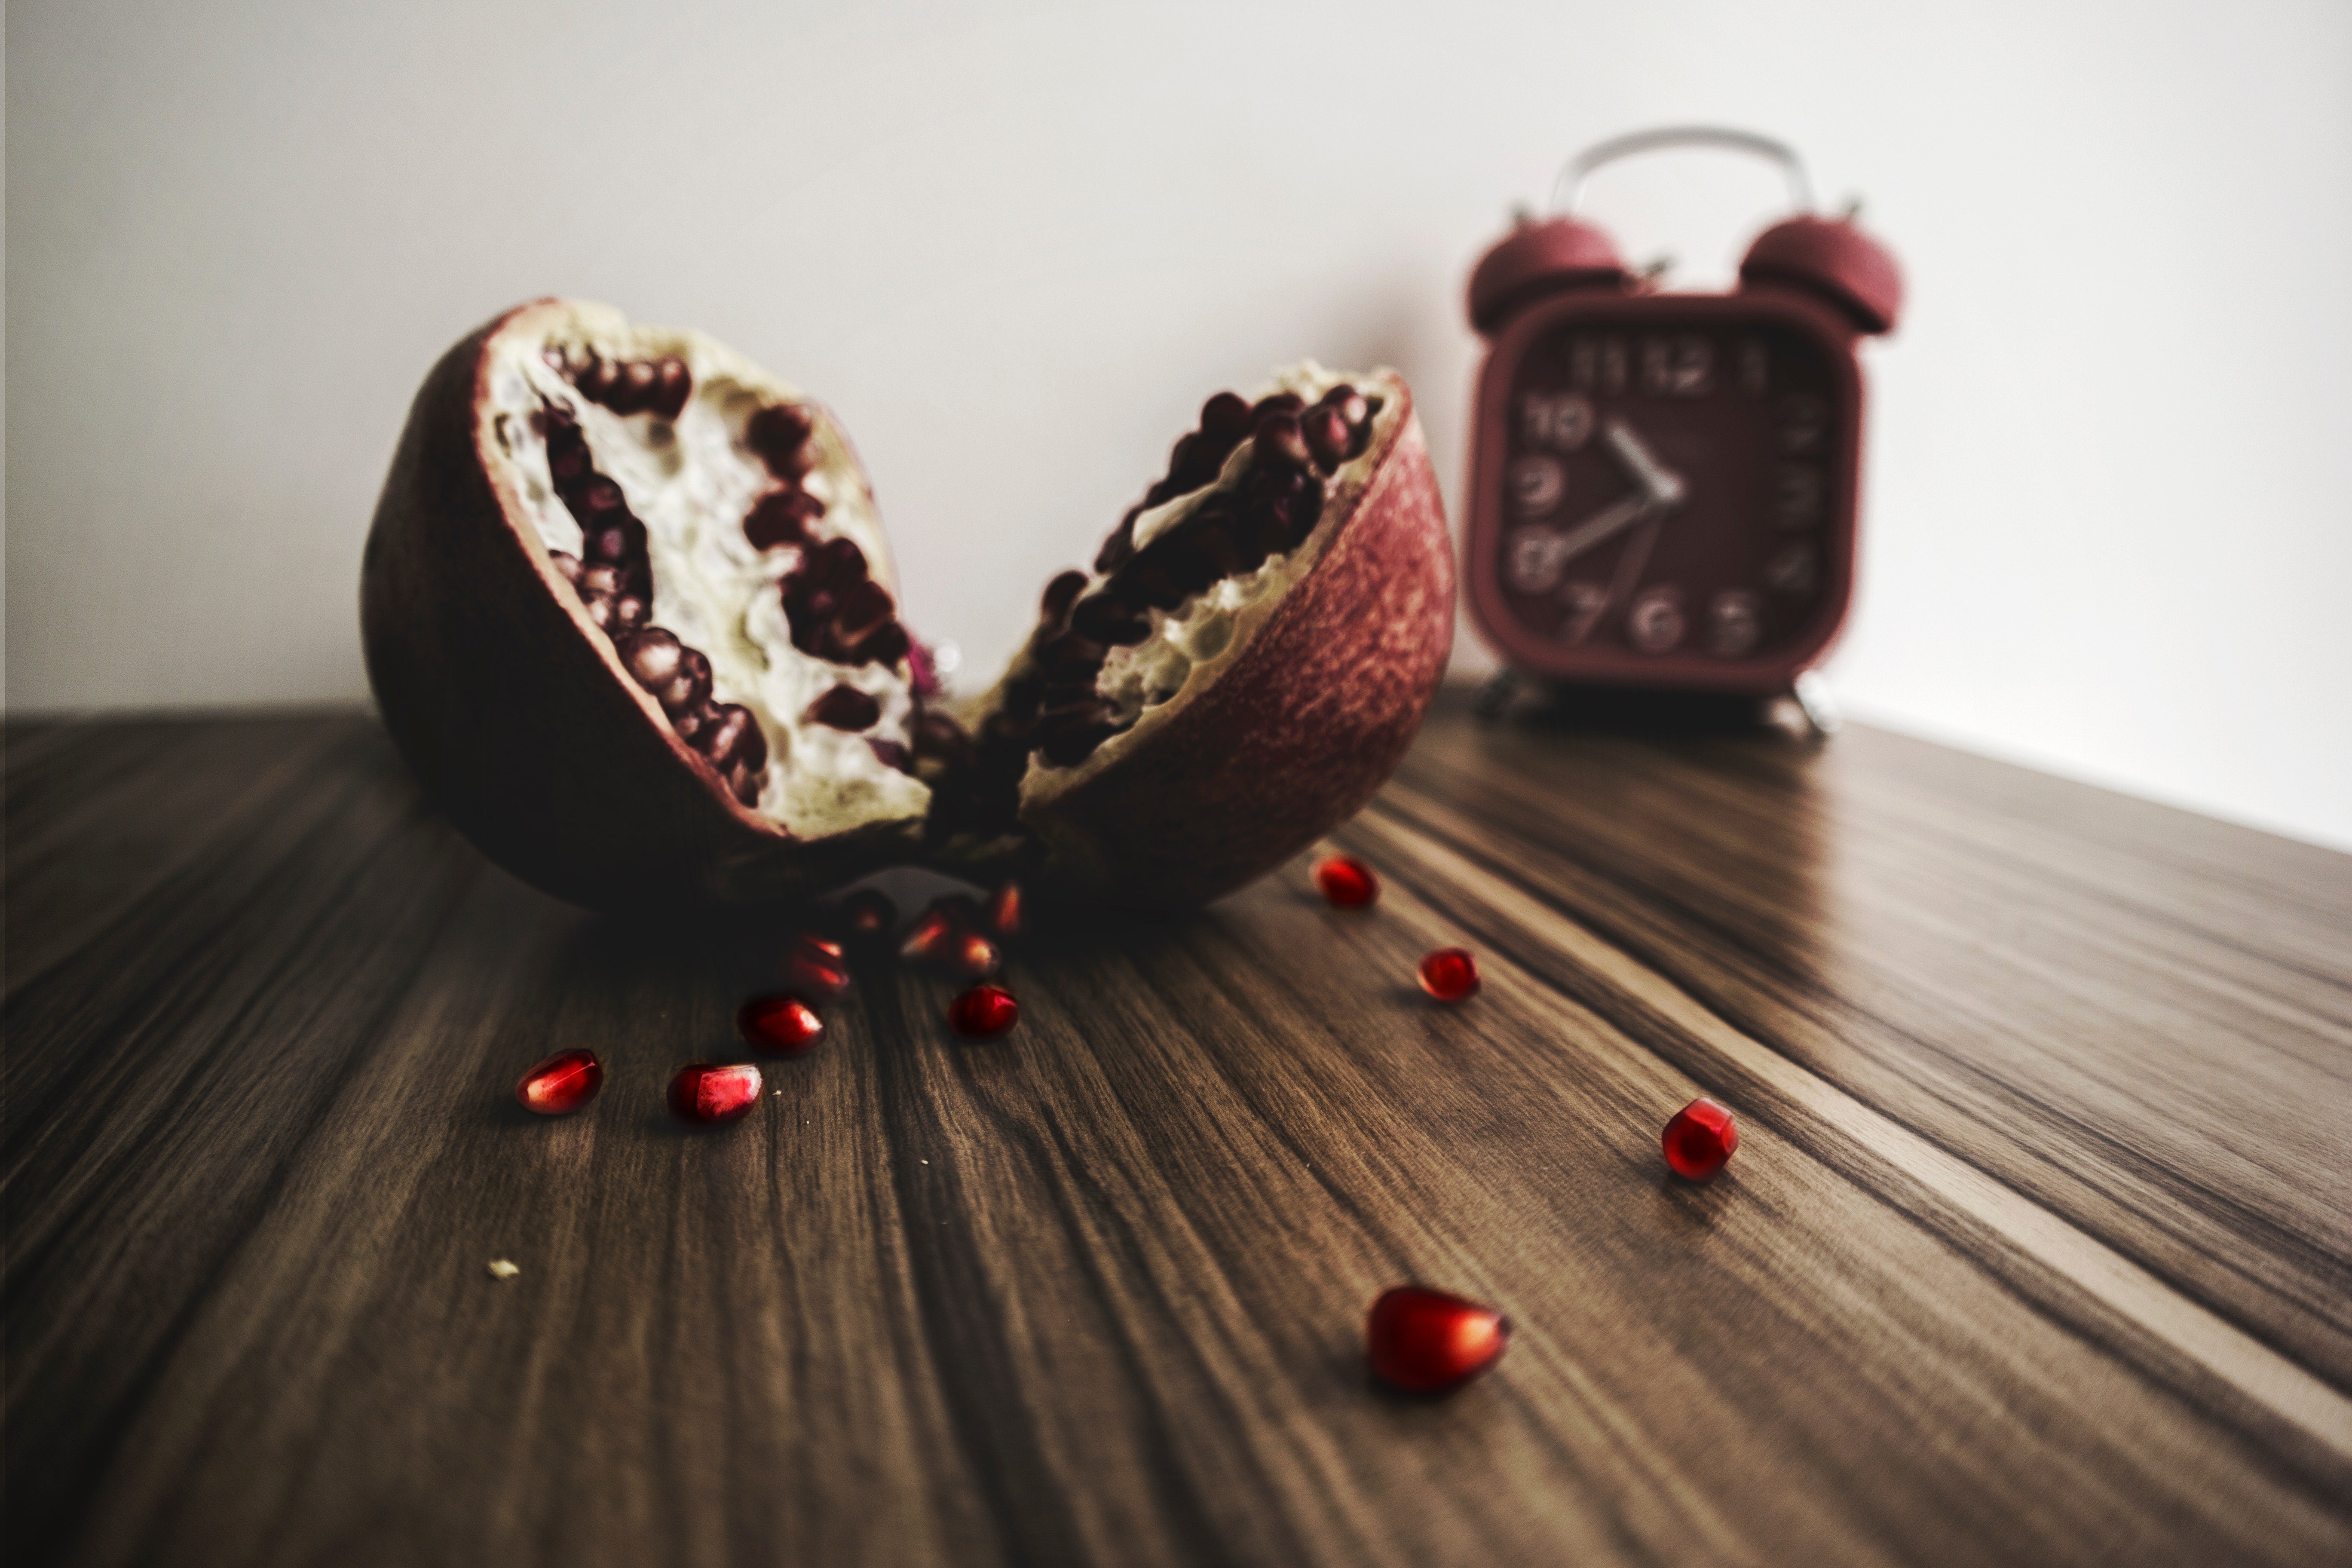 Pomegranate on a wooden table with a red clock